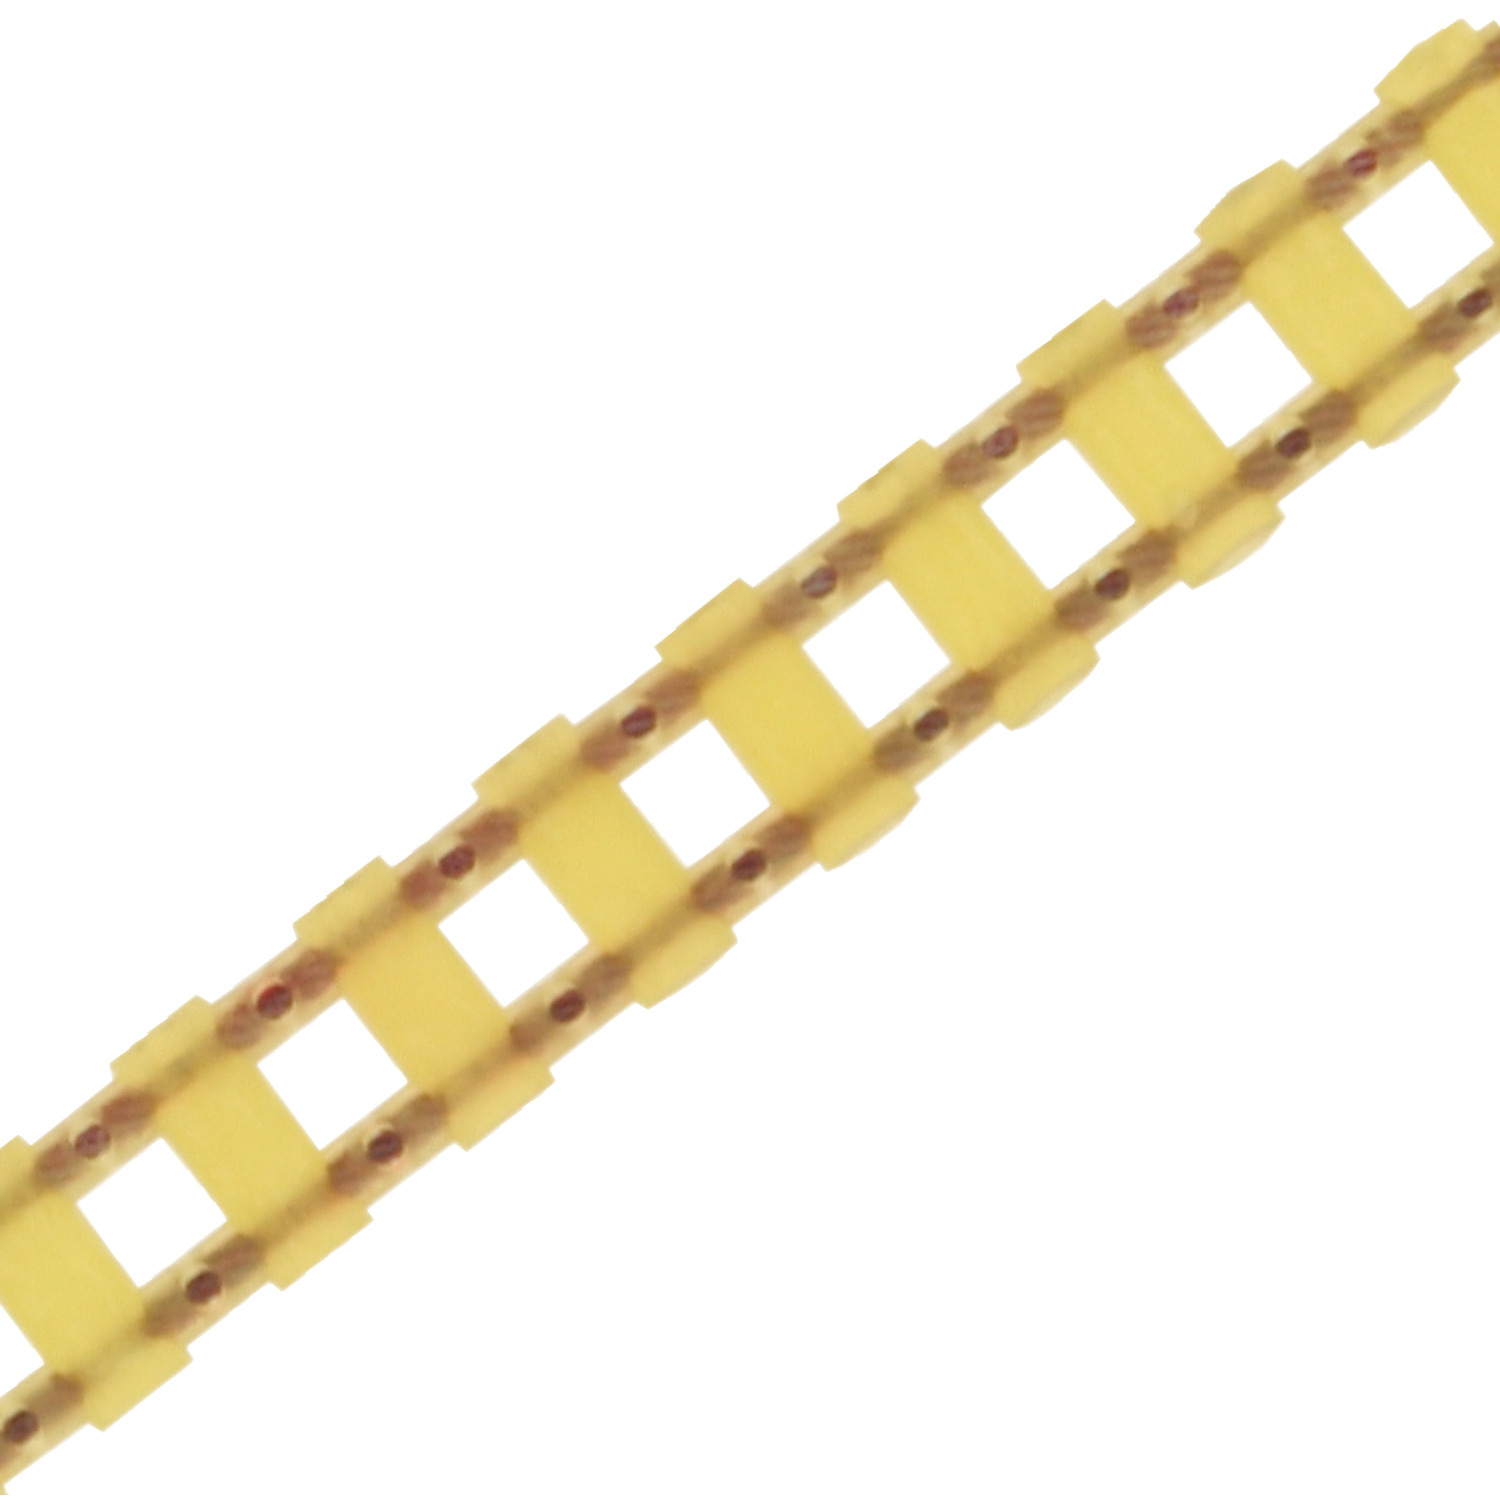 R1065.070 Cable chain - 70 pitches 